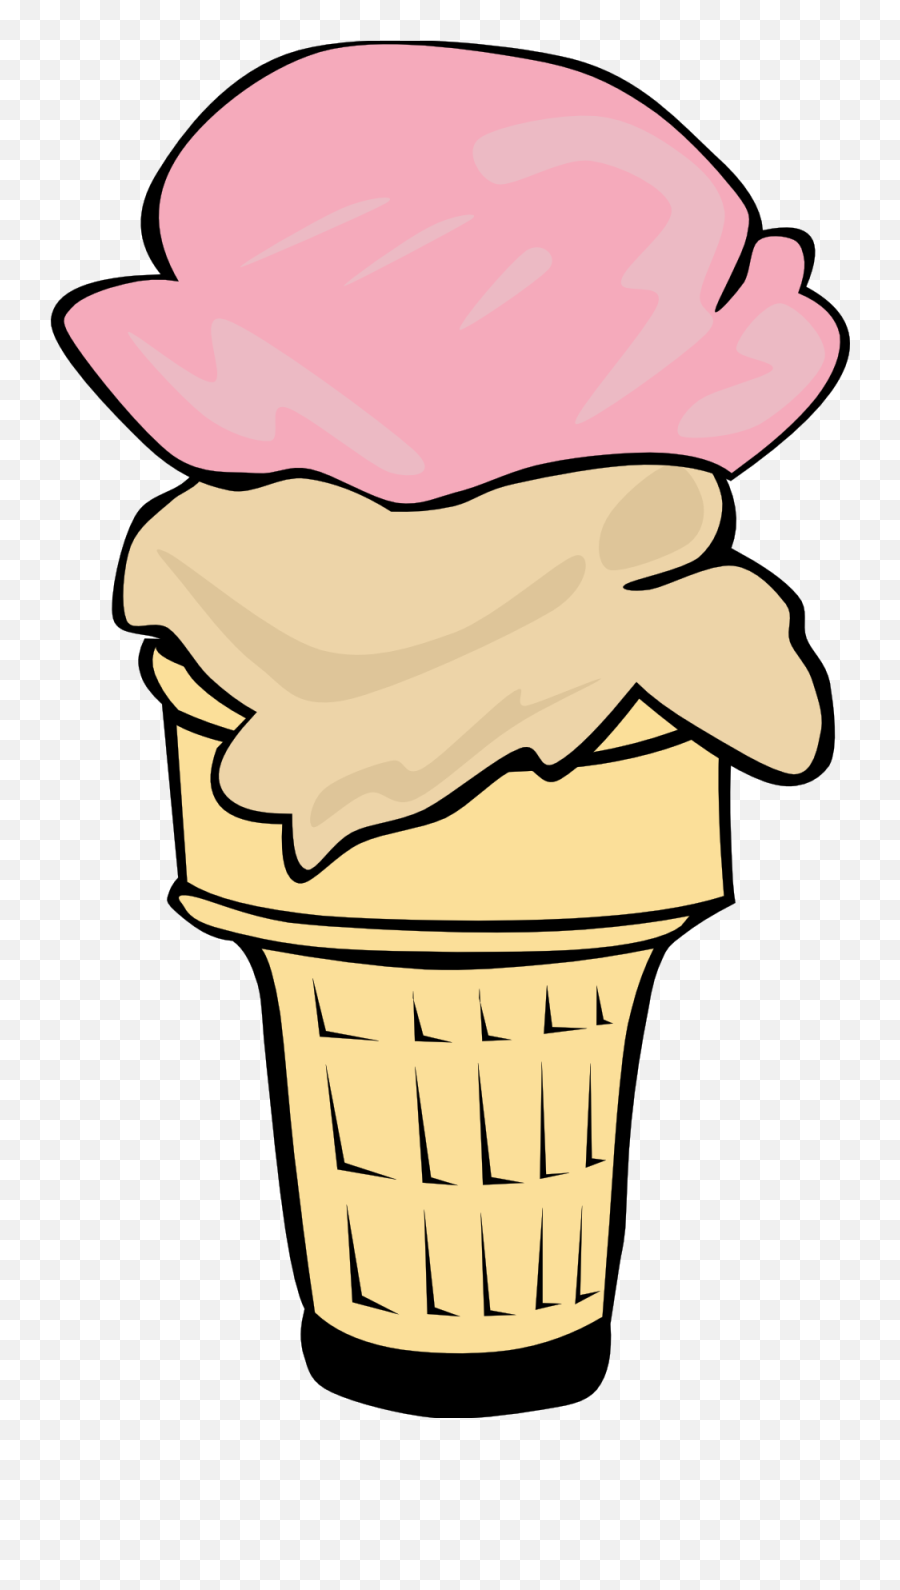 Free Picture Of A Ice Cream Cone Download Free Clip Art - Ice Cream Clipart Emoji,Ice Cream Cone Emoji